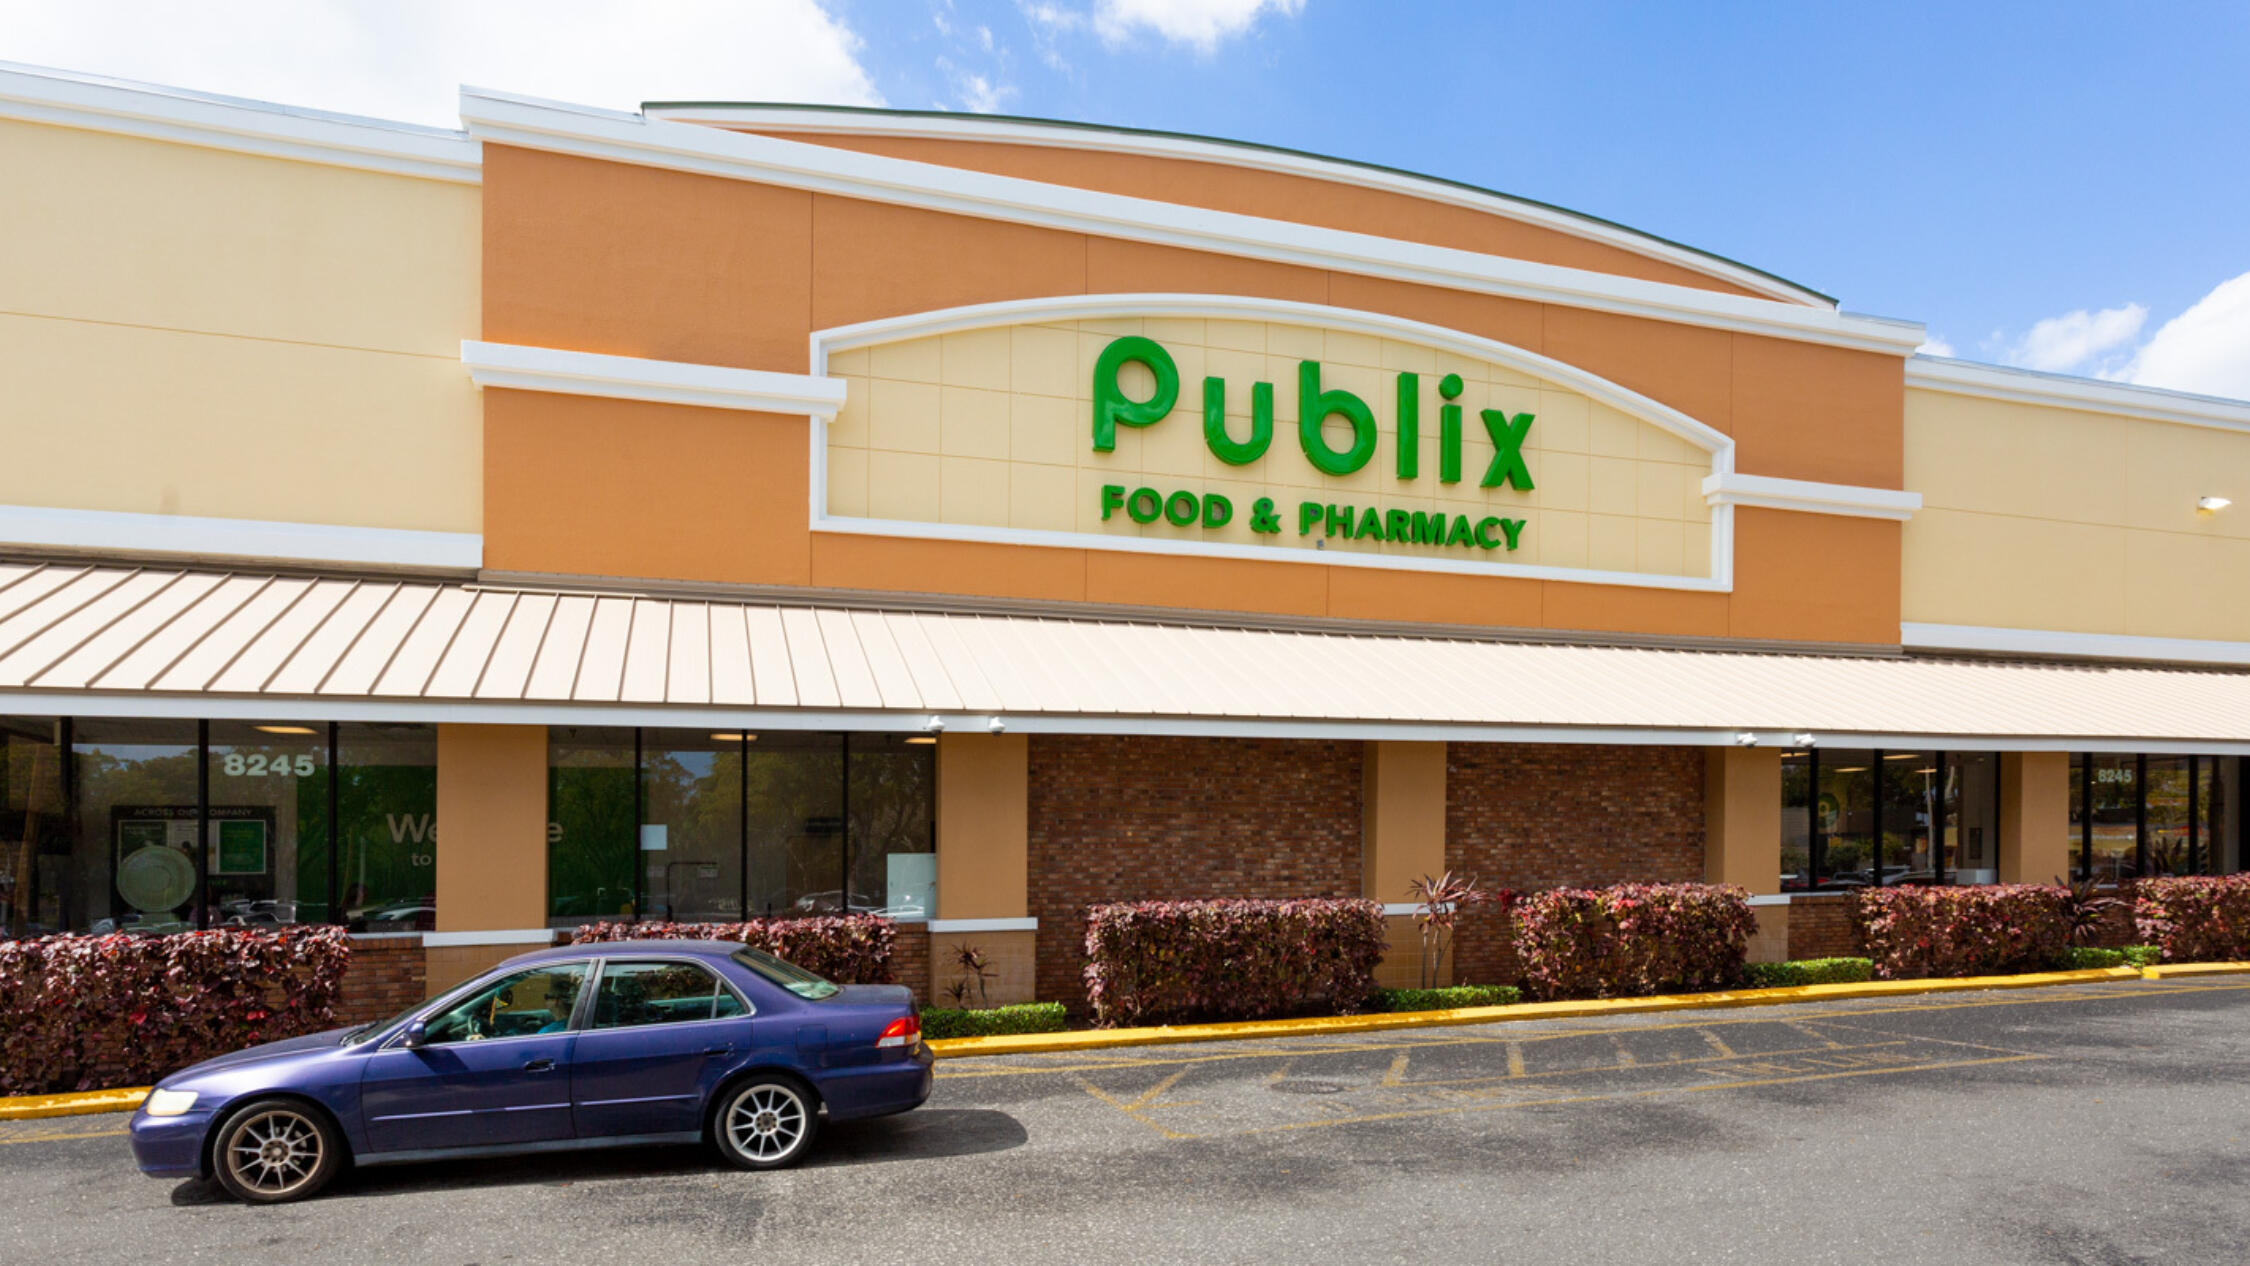 Publix Façade at Tamarac Town Square with car on driveway in front